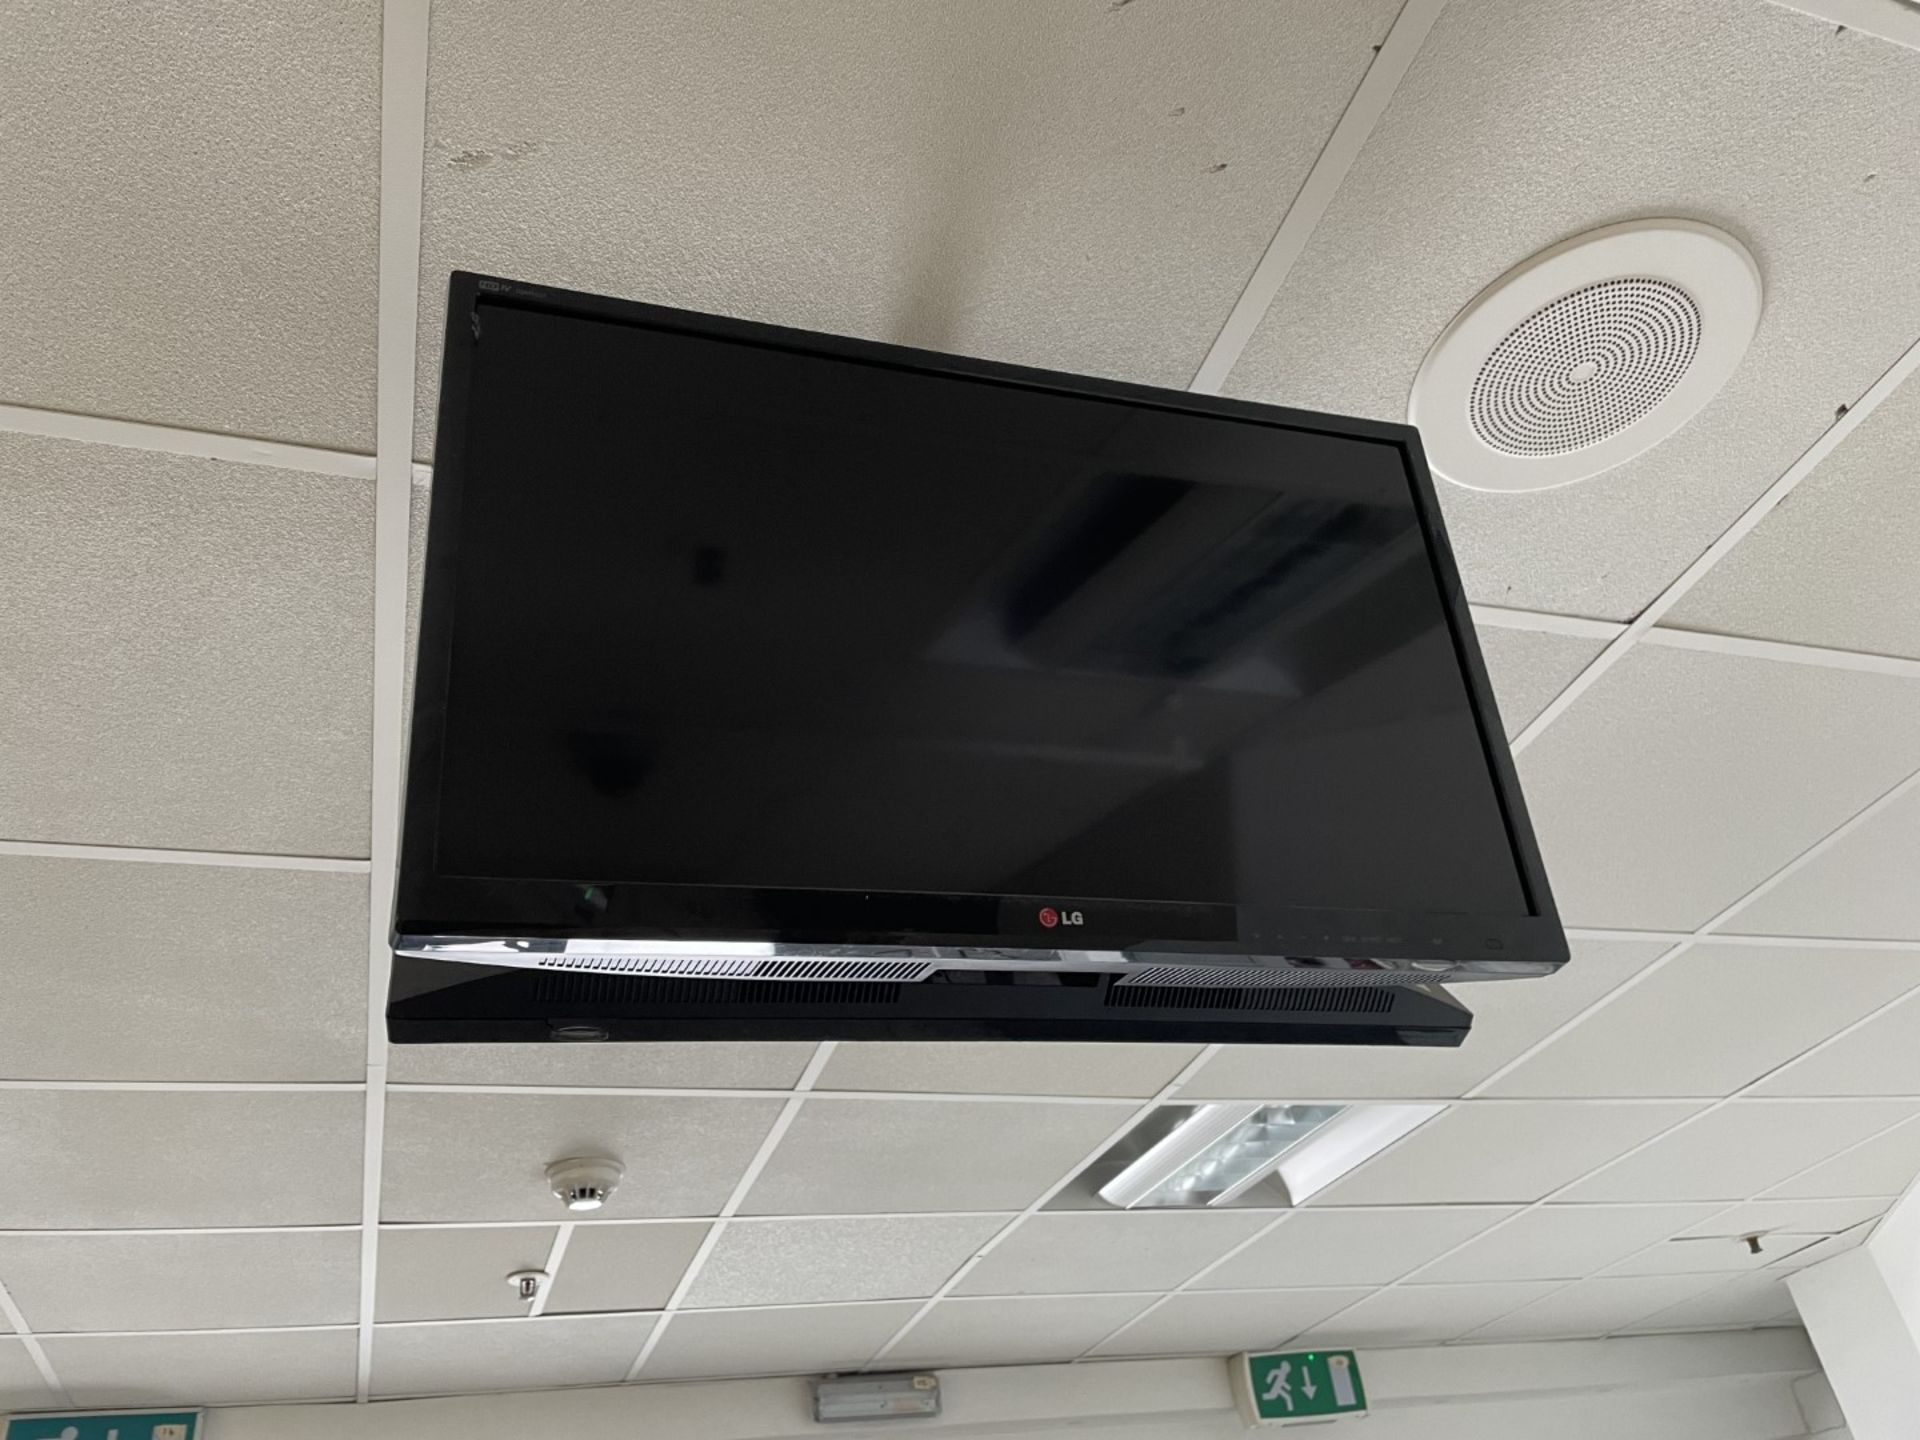 3 x LG 29 Inch LED Monitors With TV Tuners and Ceiling Mounts - CL670 - Ref: GEM205 - Location: - Image 2 of 7